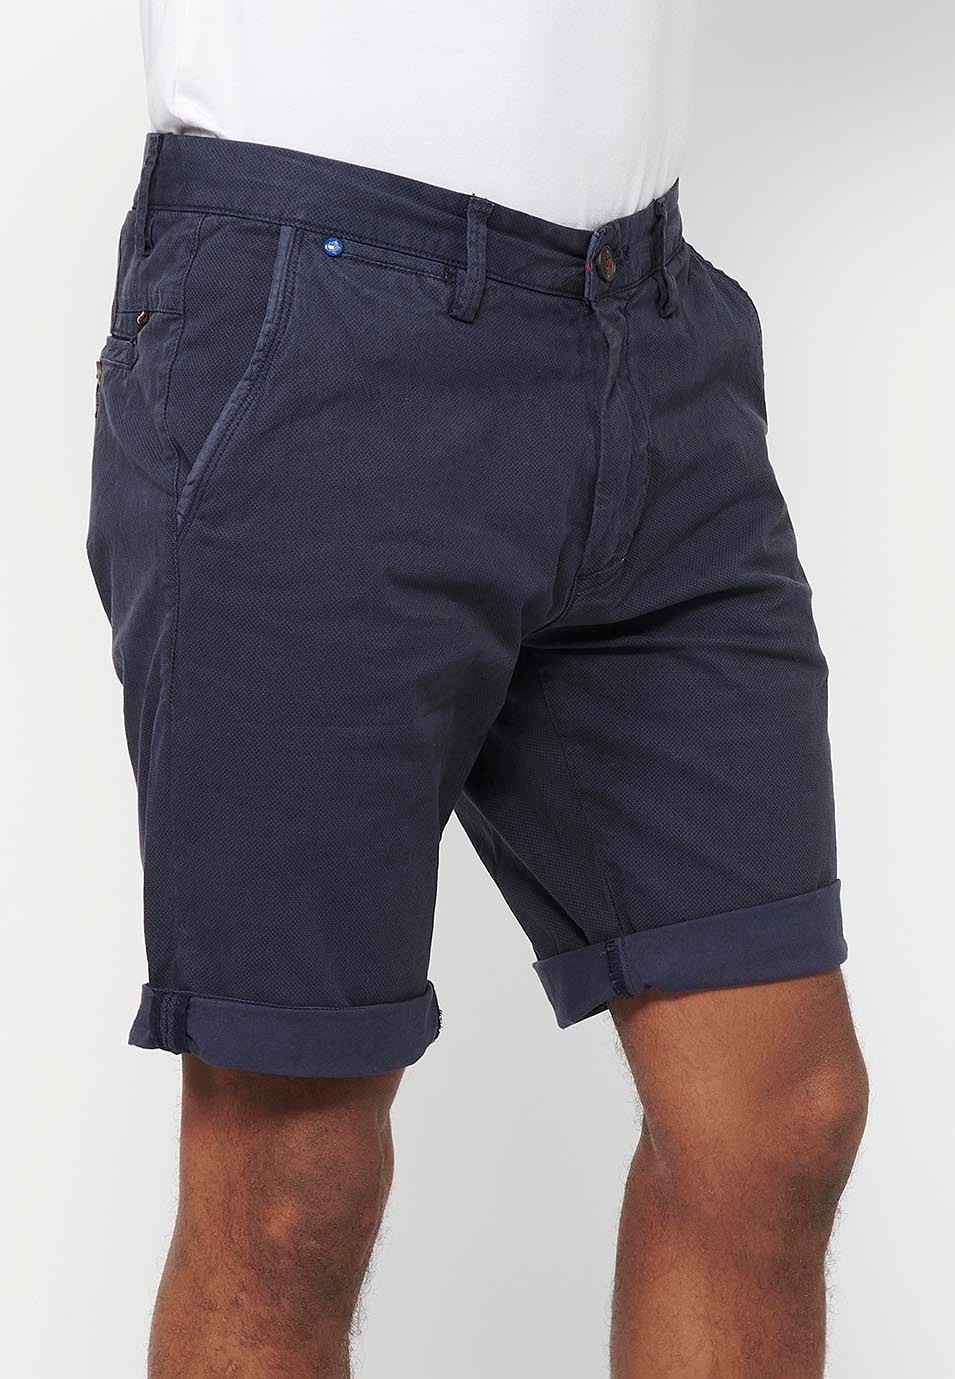 Bermuda Chino shorts with turn-up finish with front zipper and button closure with four pockets in Navy Color for Men 3